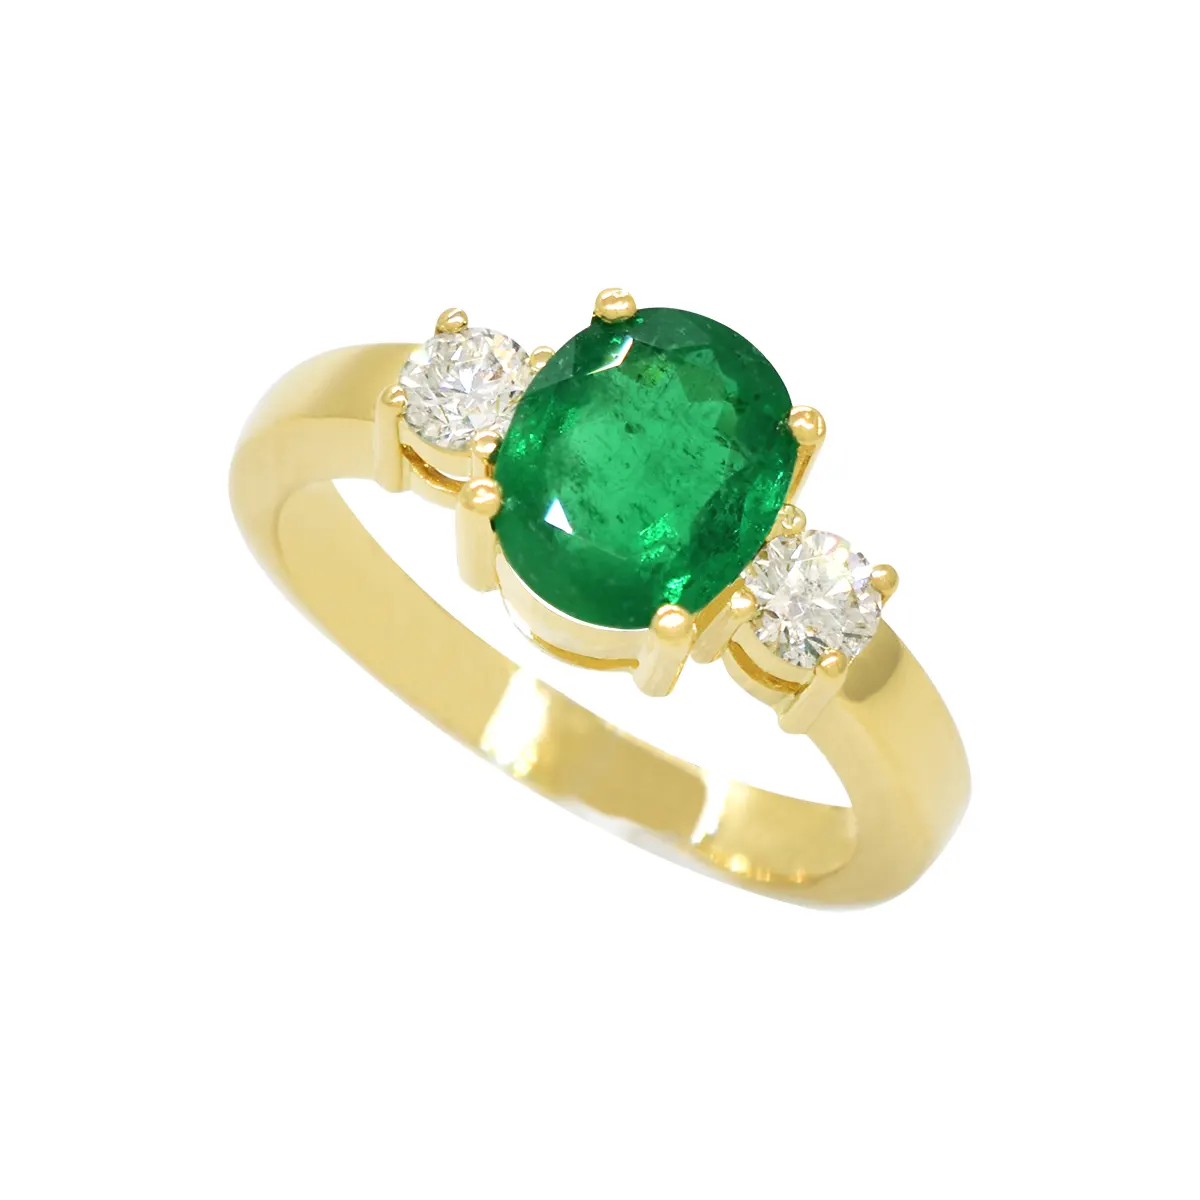 oval-shape-emerald-ring-with-2-round-cut-diamonds-in-3-stones-design